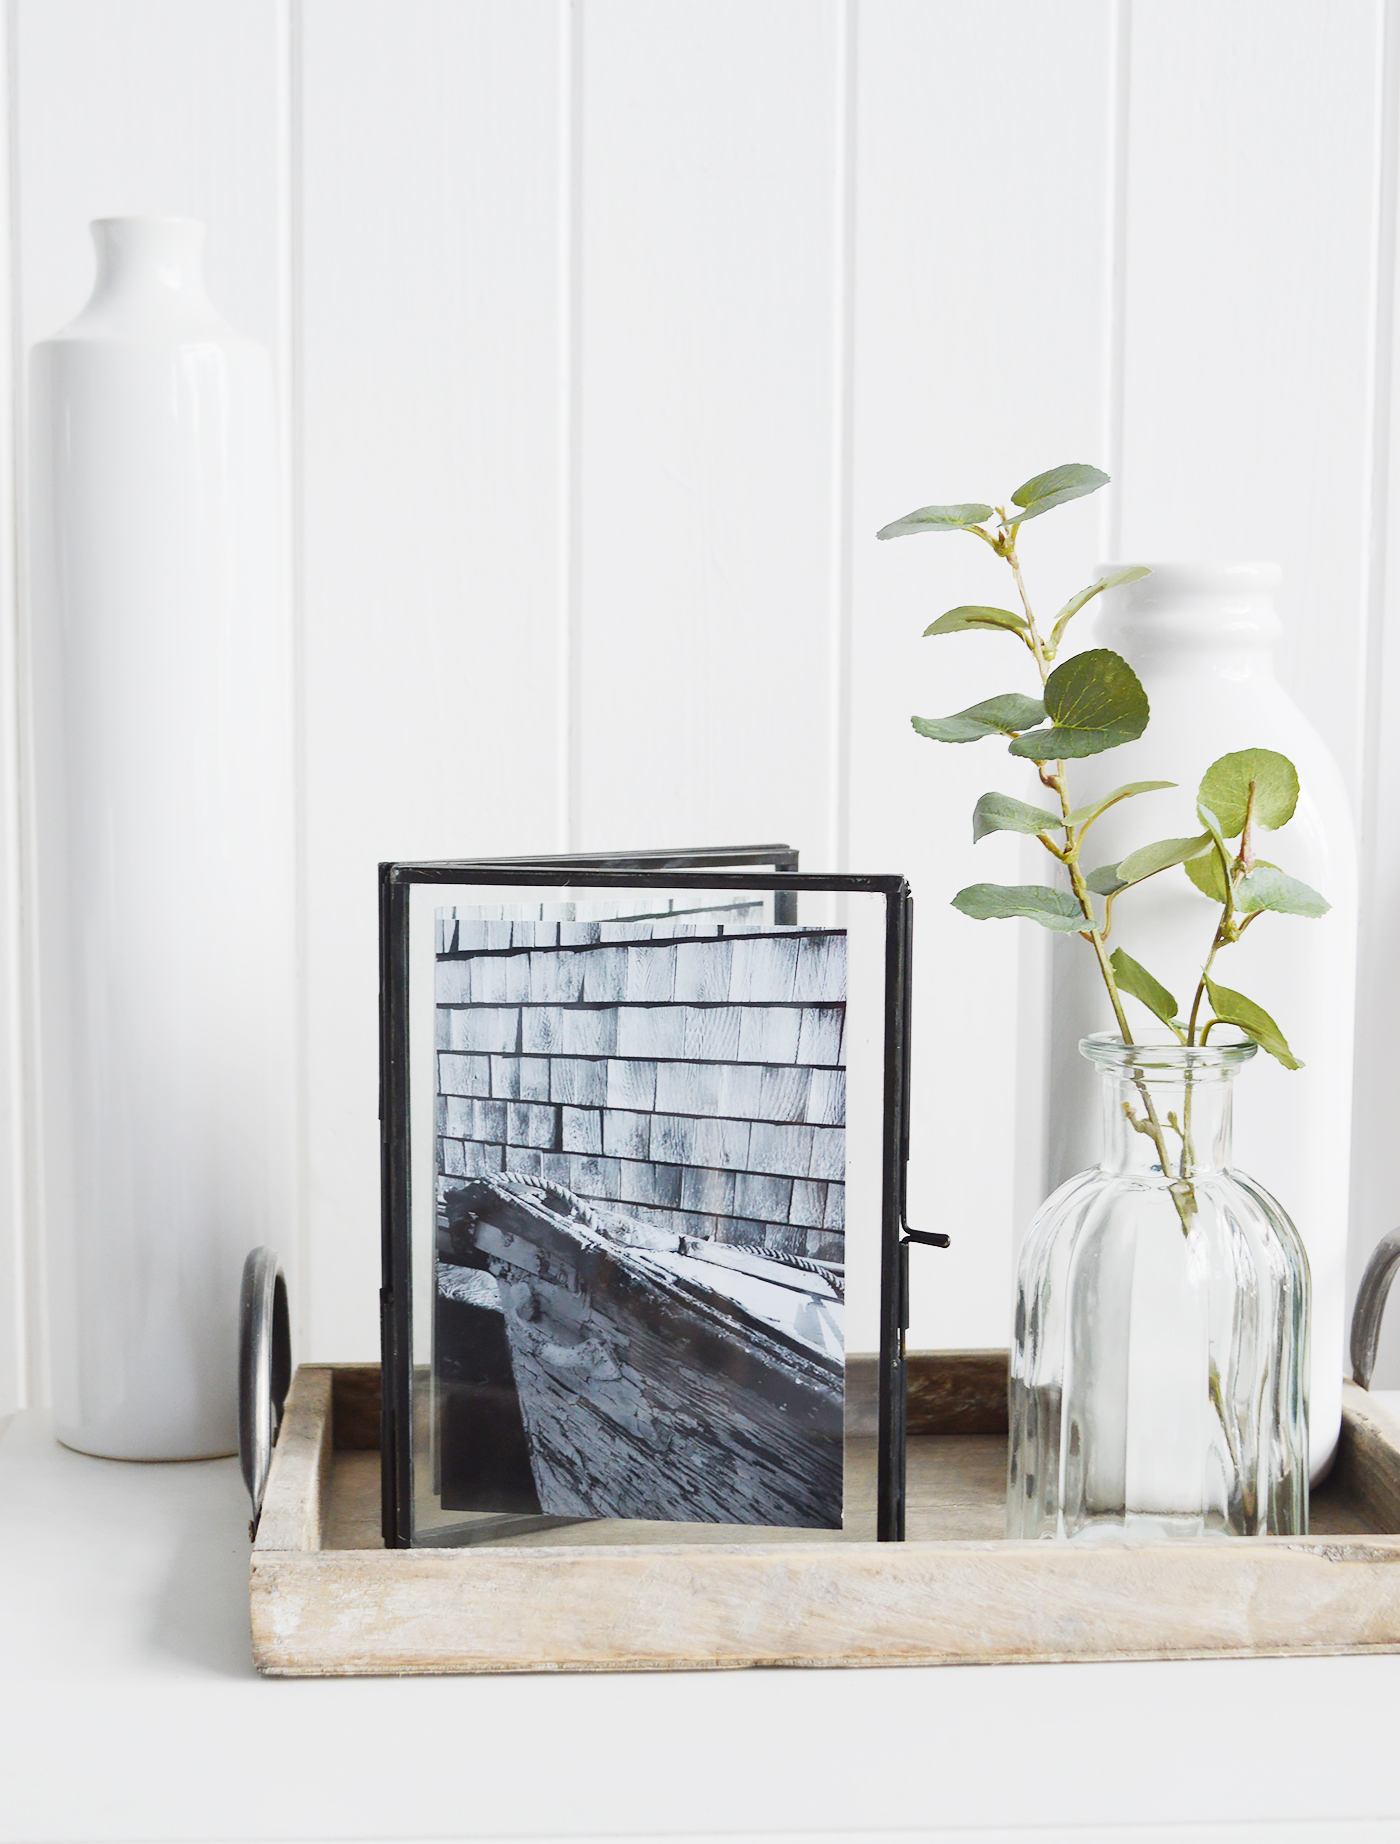 Putney glass photo frame for 5 x 7 photographs - portrait or landscape. White Furniture and home decor accessories for the New England styled home for all country, coastal and city houses.